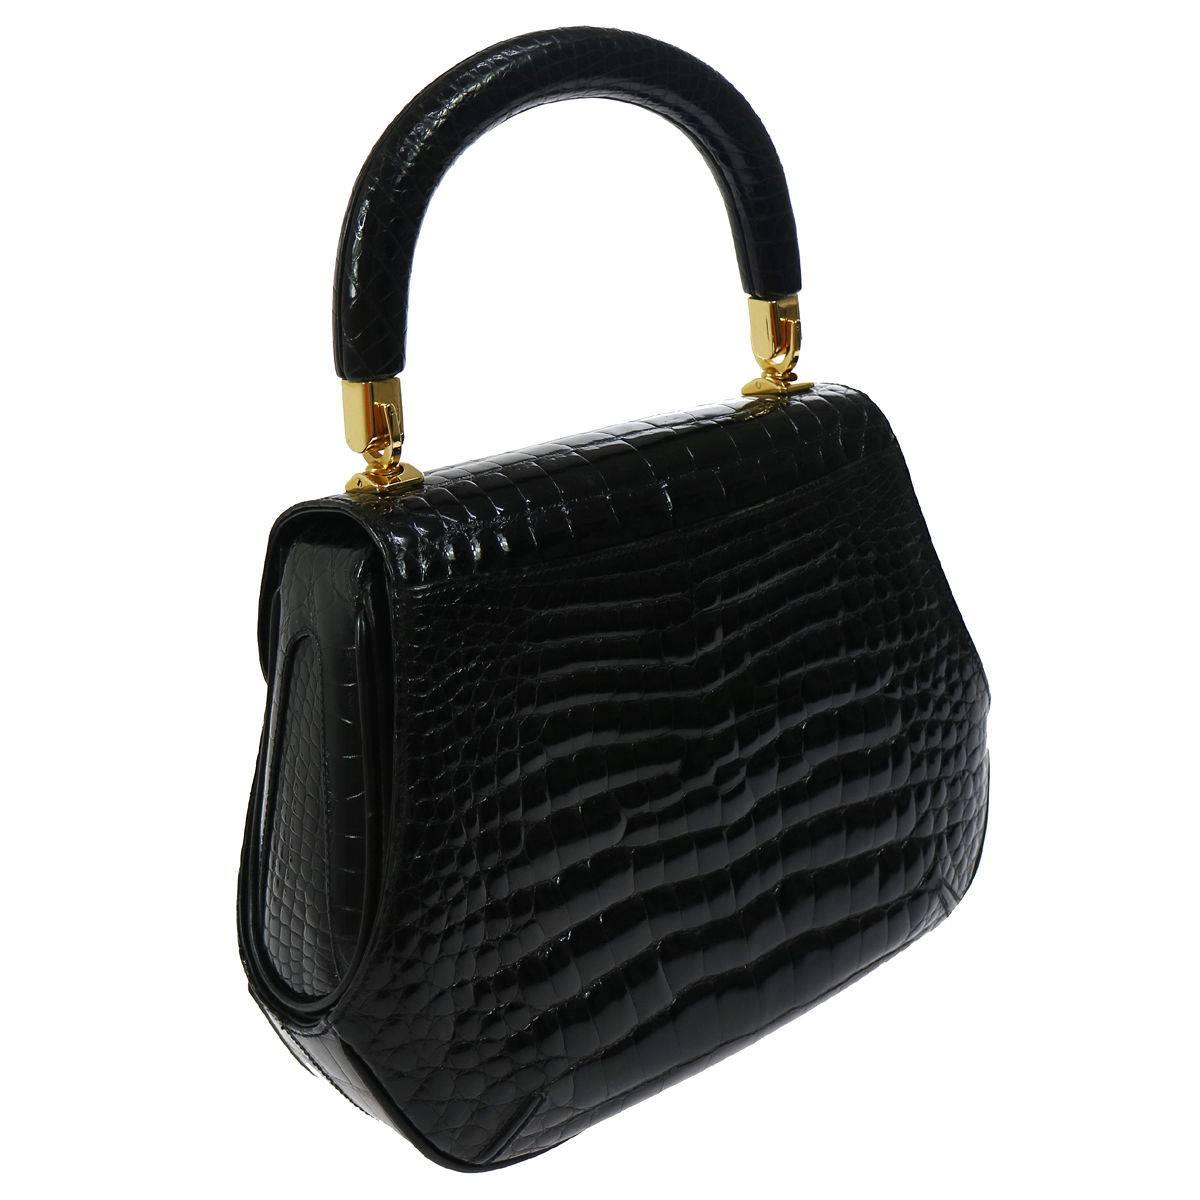 Gucci Black Crocodile Kelly Style Evening Top Handle Satchel Flap Bag in Box

Crocodile
Gold toe hardware
Leather lining
Made in Italy
Handle drop 5"
Measures 10" W x 8" H x 3.5" D 
Includes original Gucci dust bag and box